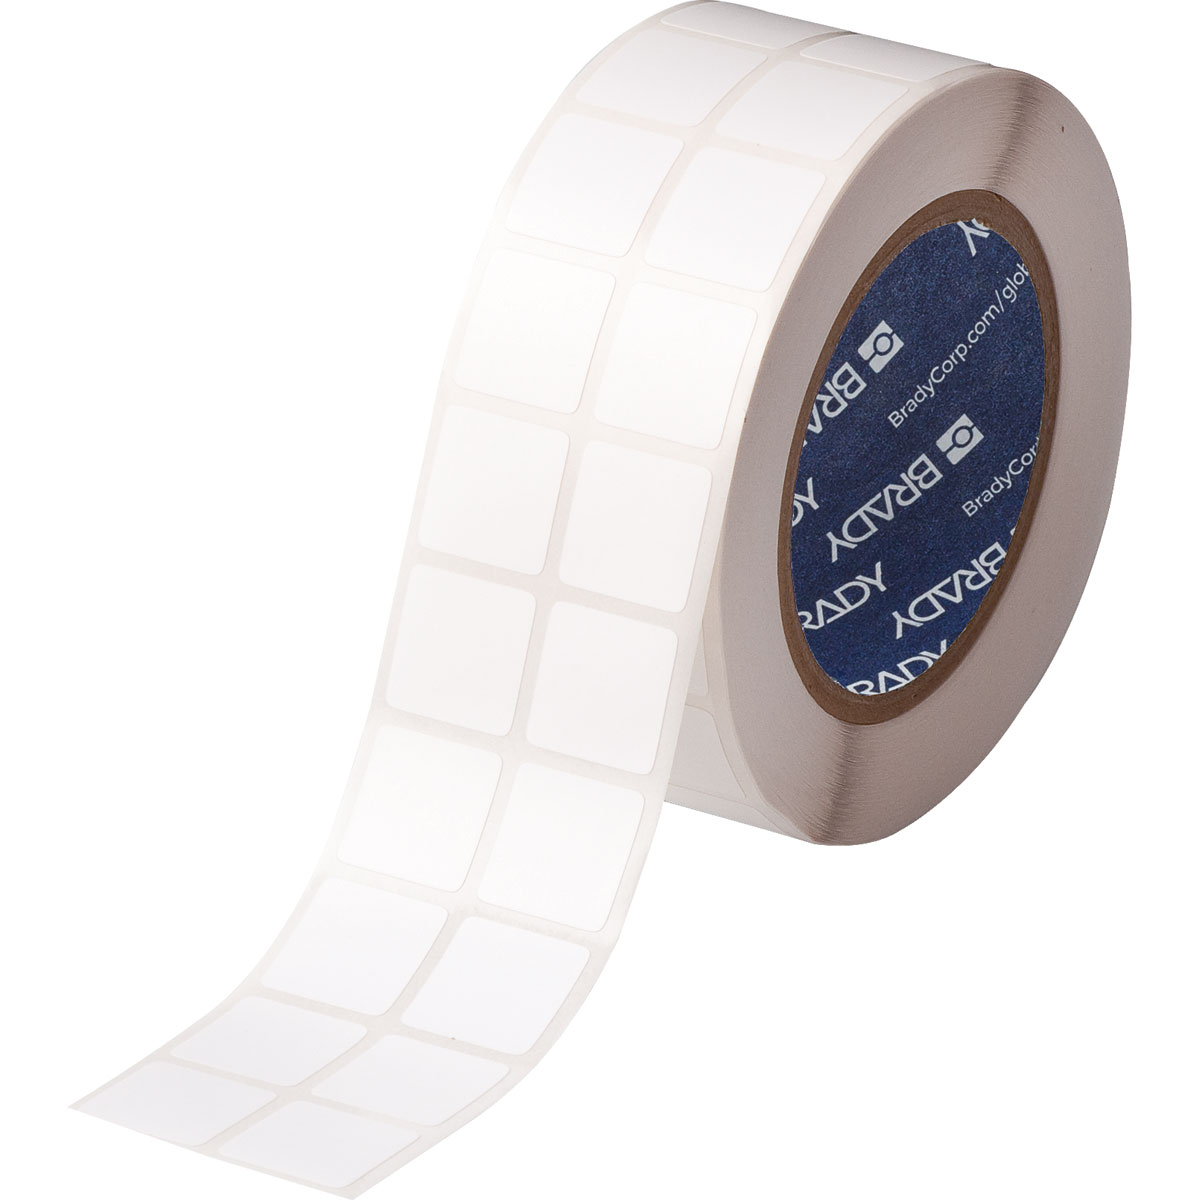 B-481 Super Chemical Resistant Polyester 3000 per Roll Brady THT-194-481-3 0.9 Width x 0.75 Height Matte Finish White StainerBondz Slide Label 